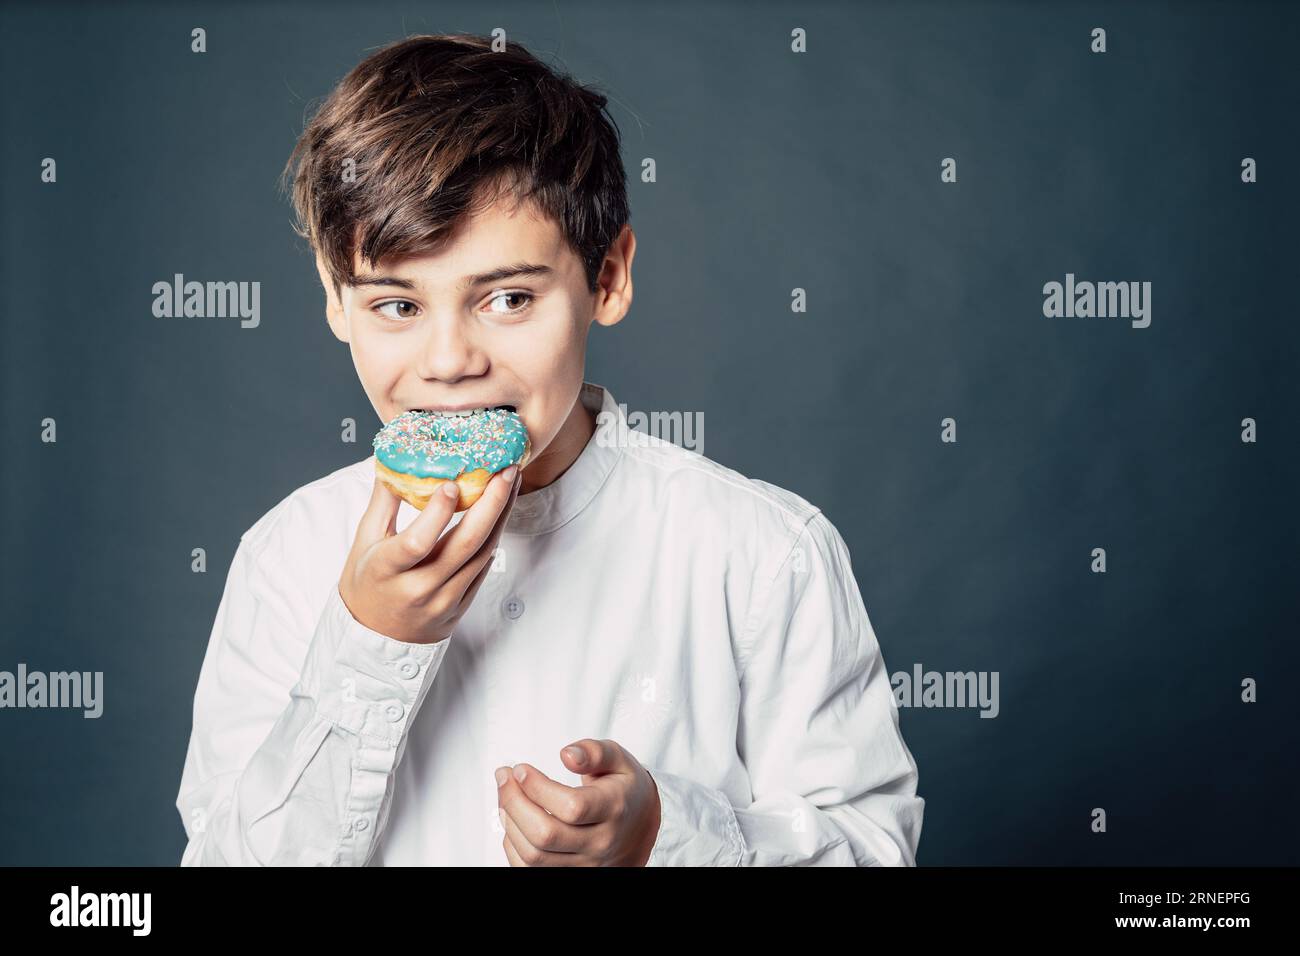 teen boy bite and taste blue donut while he is enjoying the sugar rush of his childhood Stock Photo